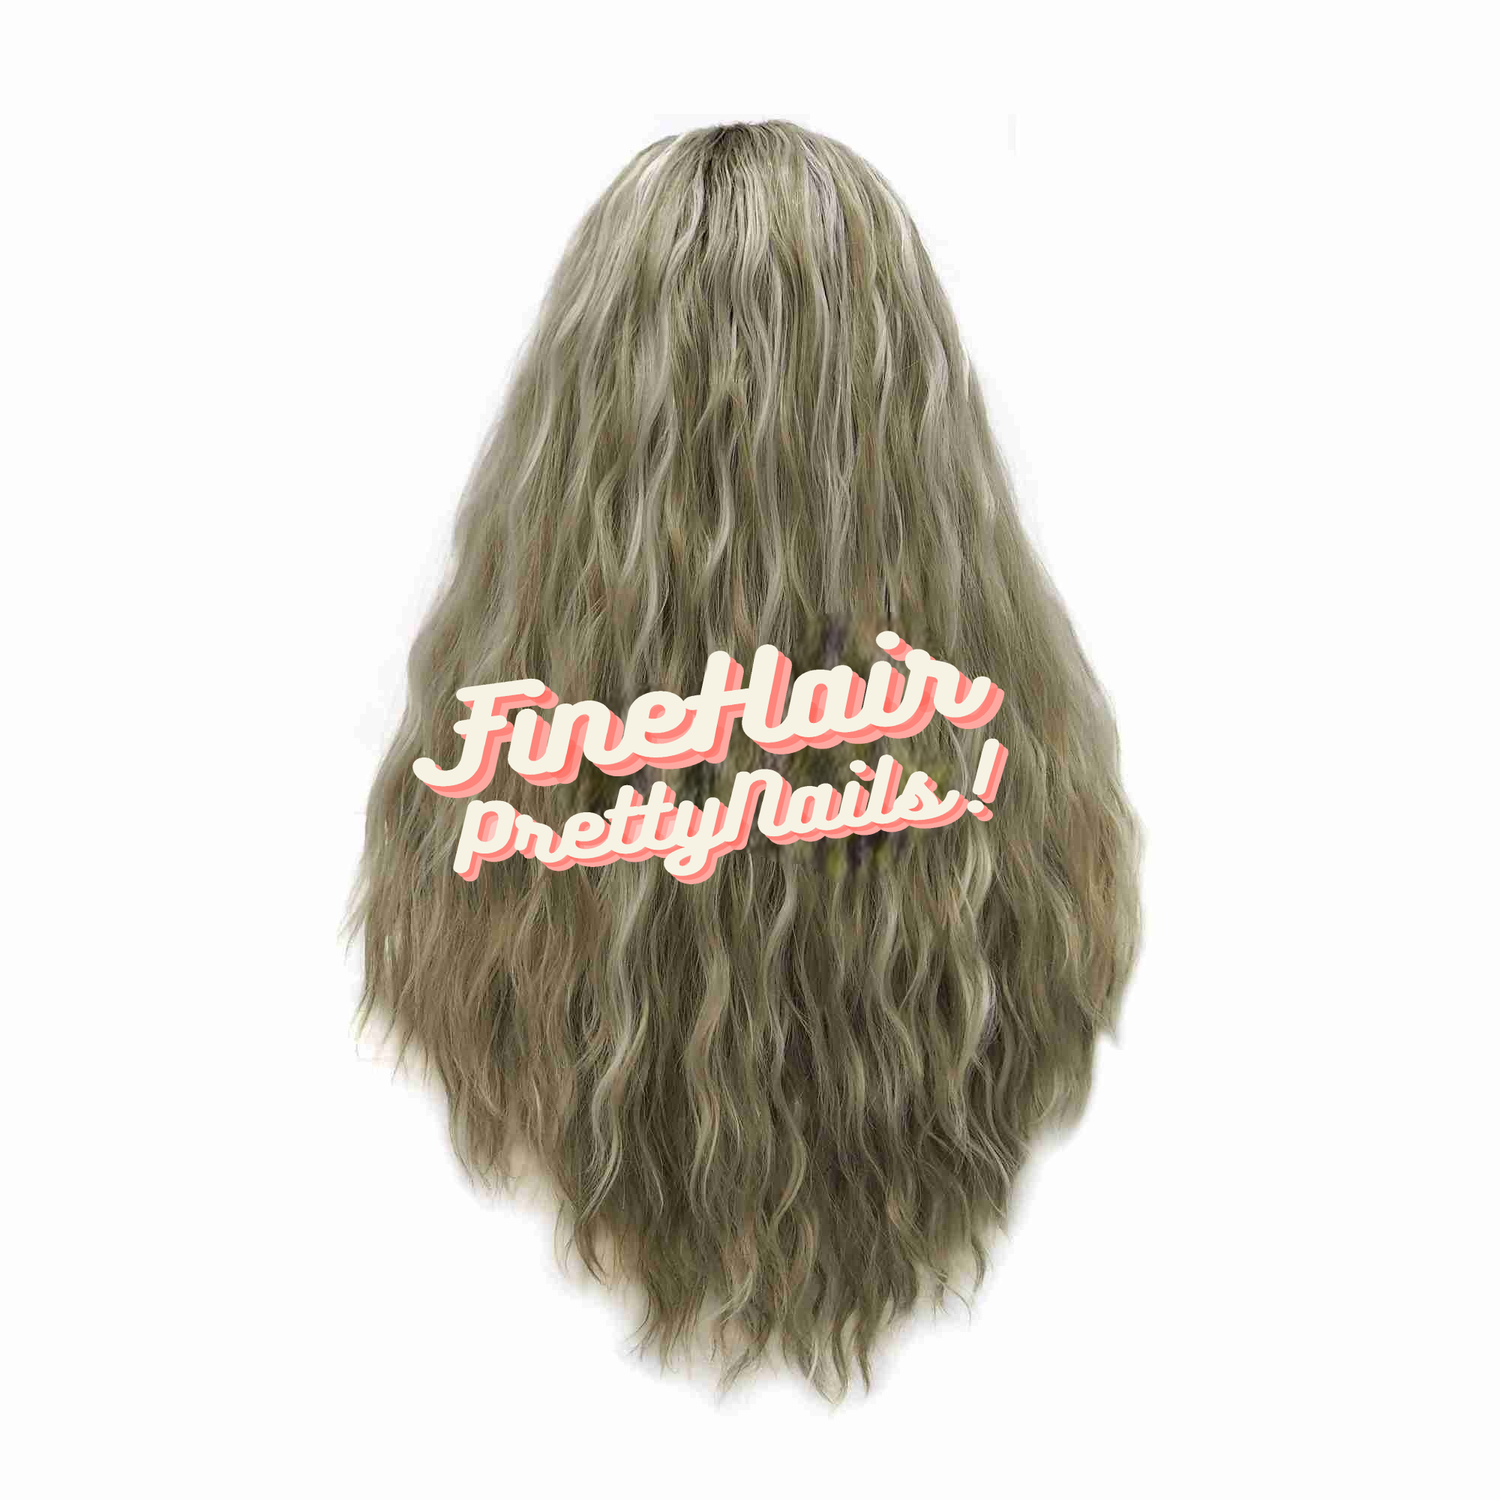 back view of blonde wavy wig with platinum blond highlights on mannequin head